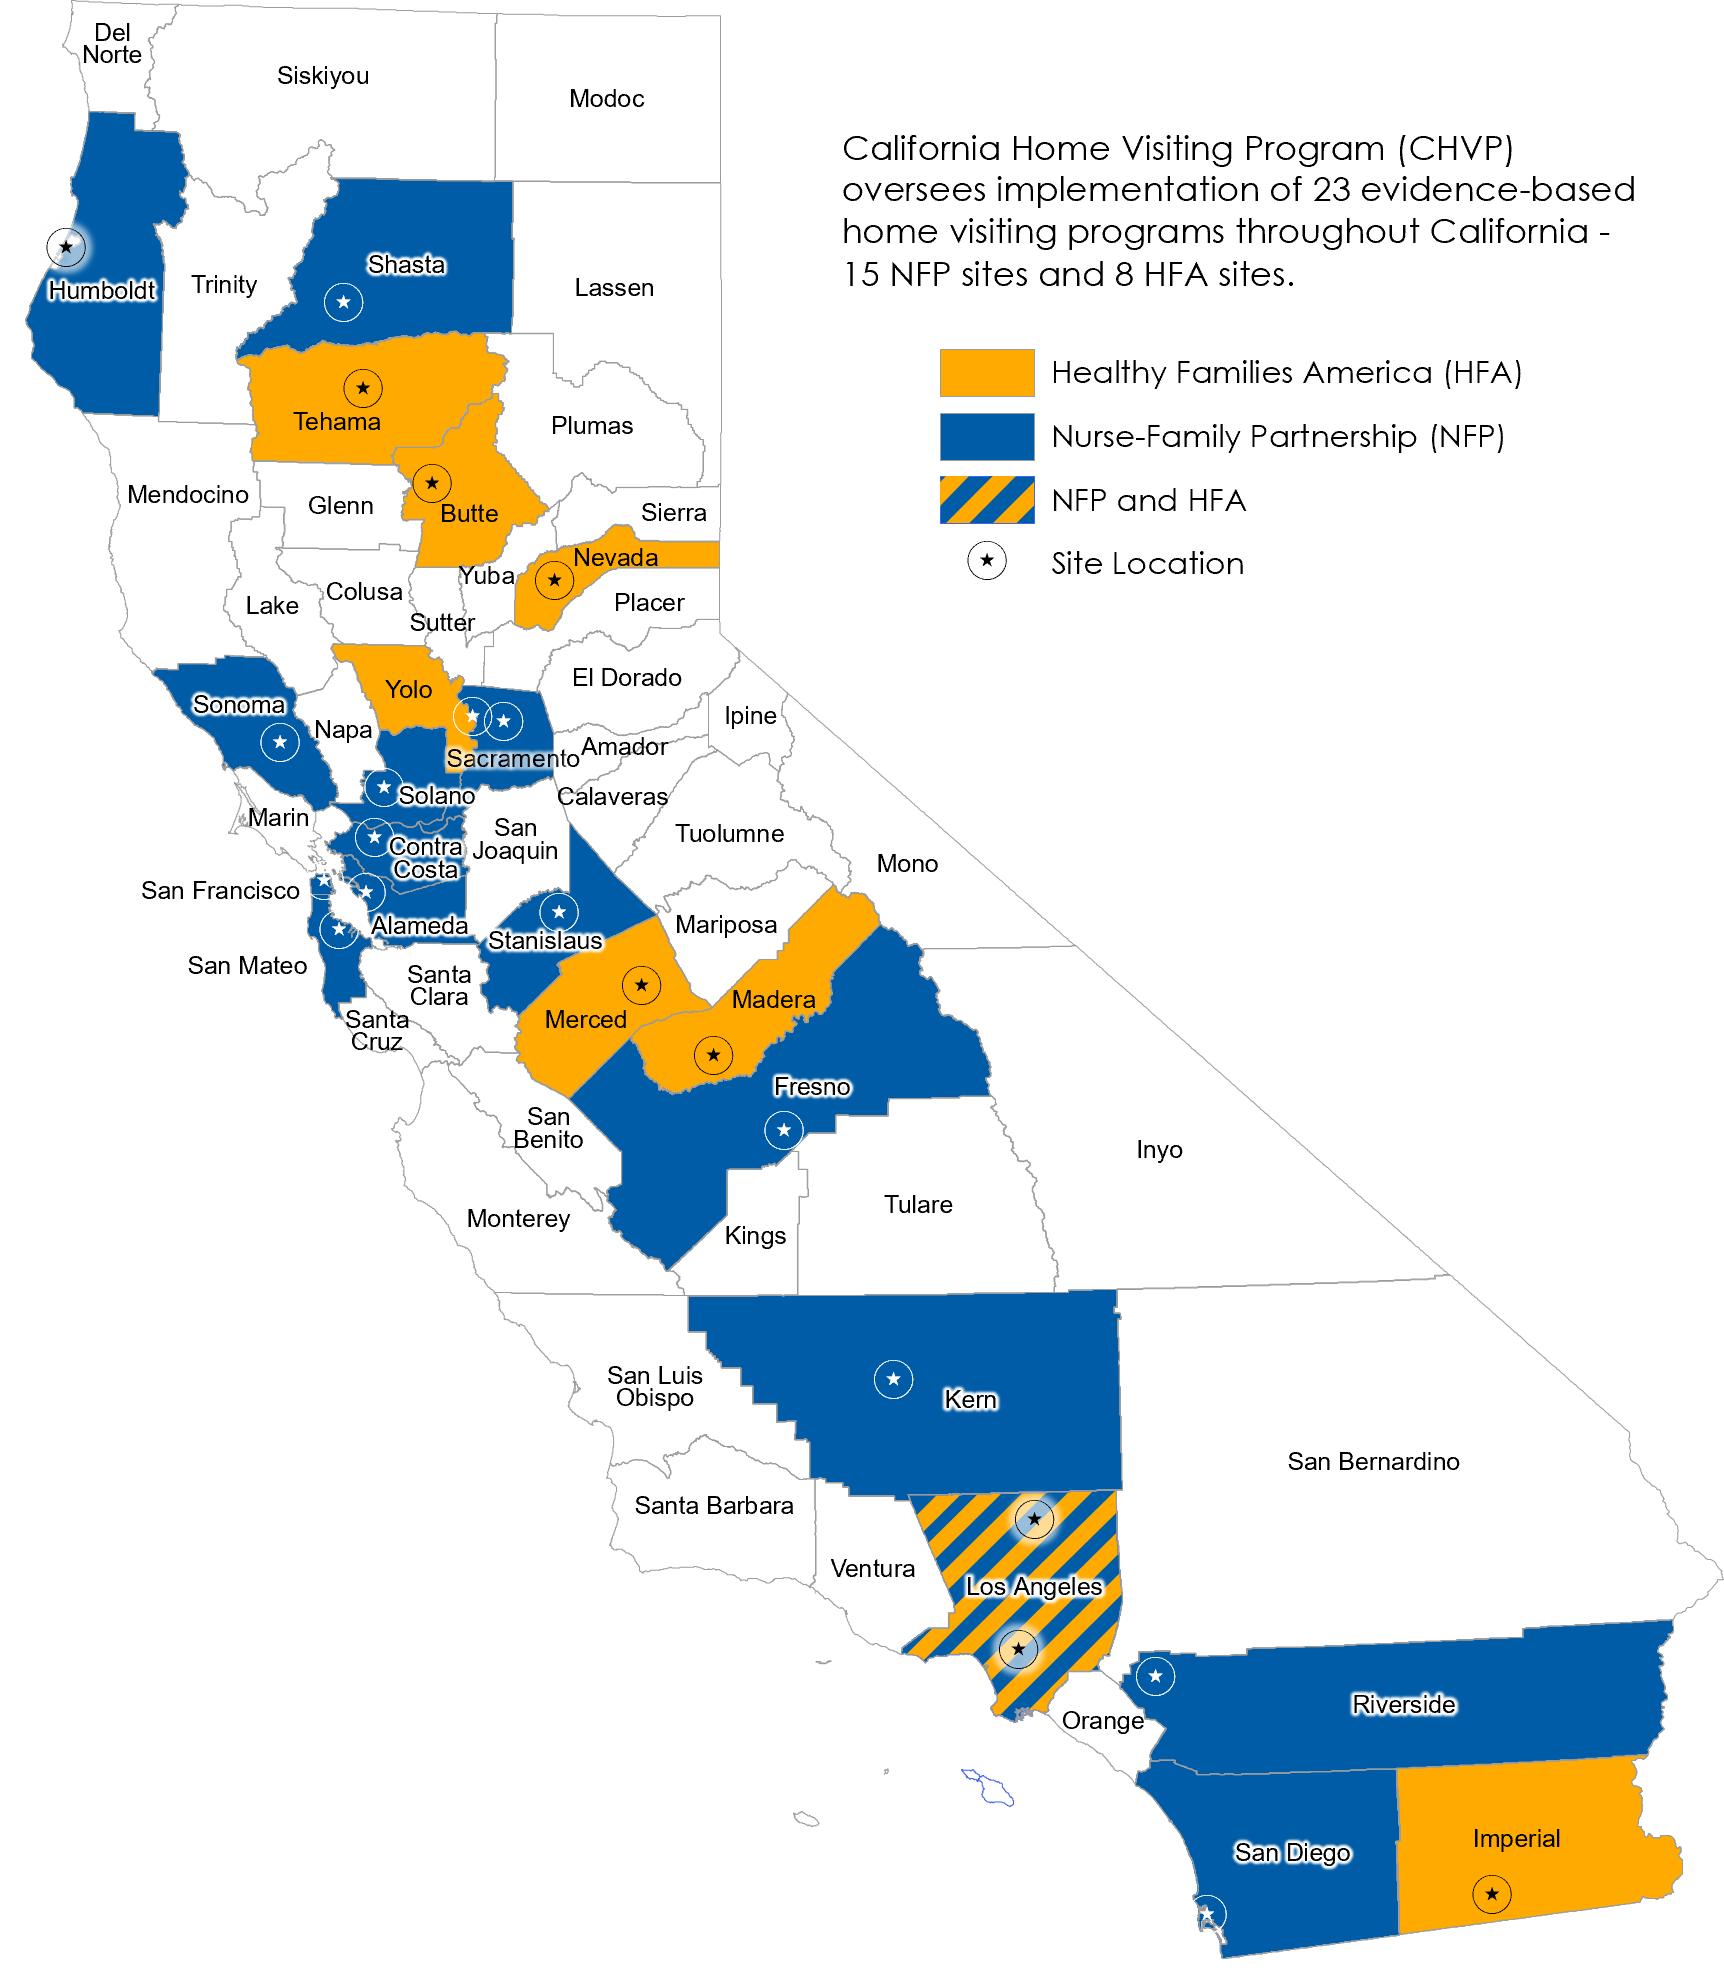 California Home Visiting Program oversees implementation of 23 evidence-based home visiting programs throughout California - 15 NFP sites and 8 HFA sites